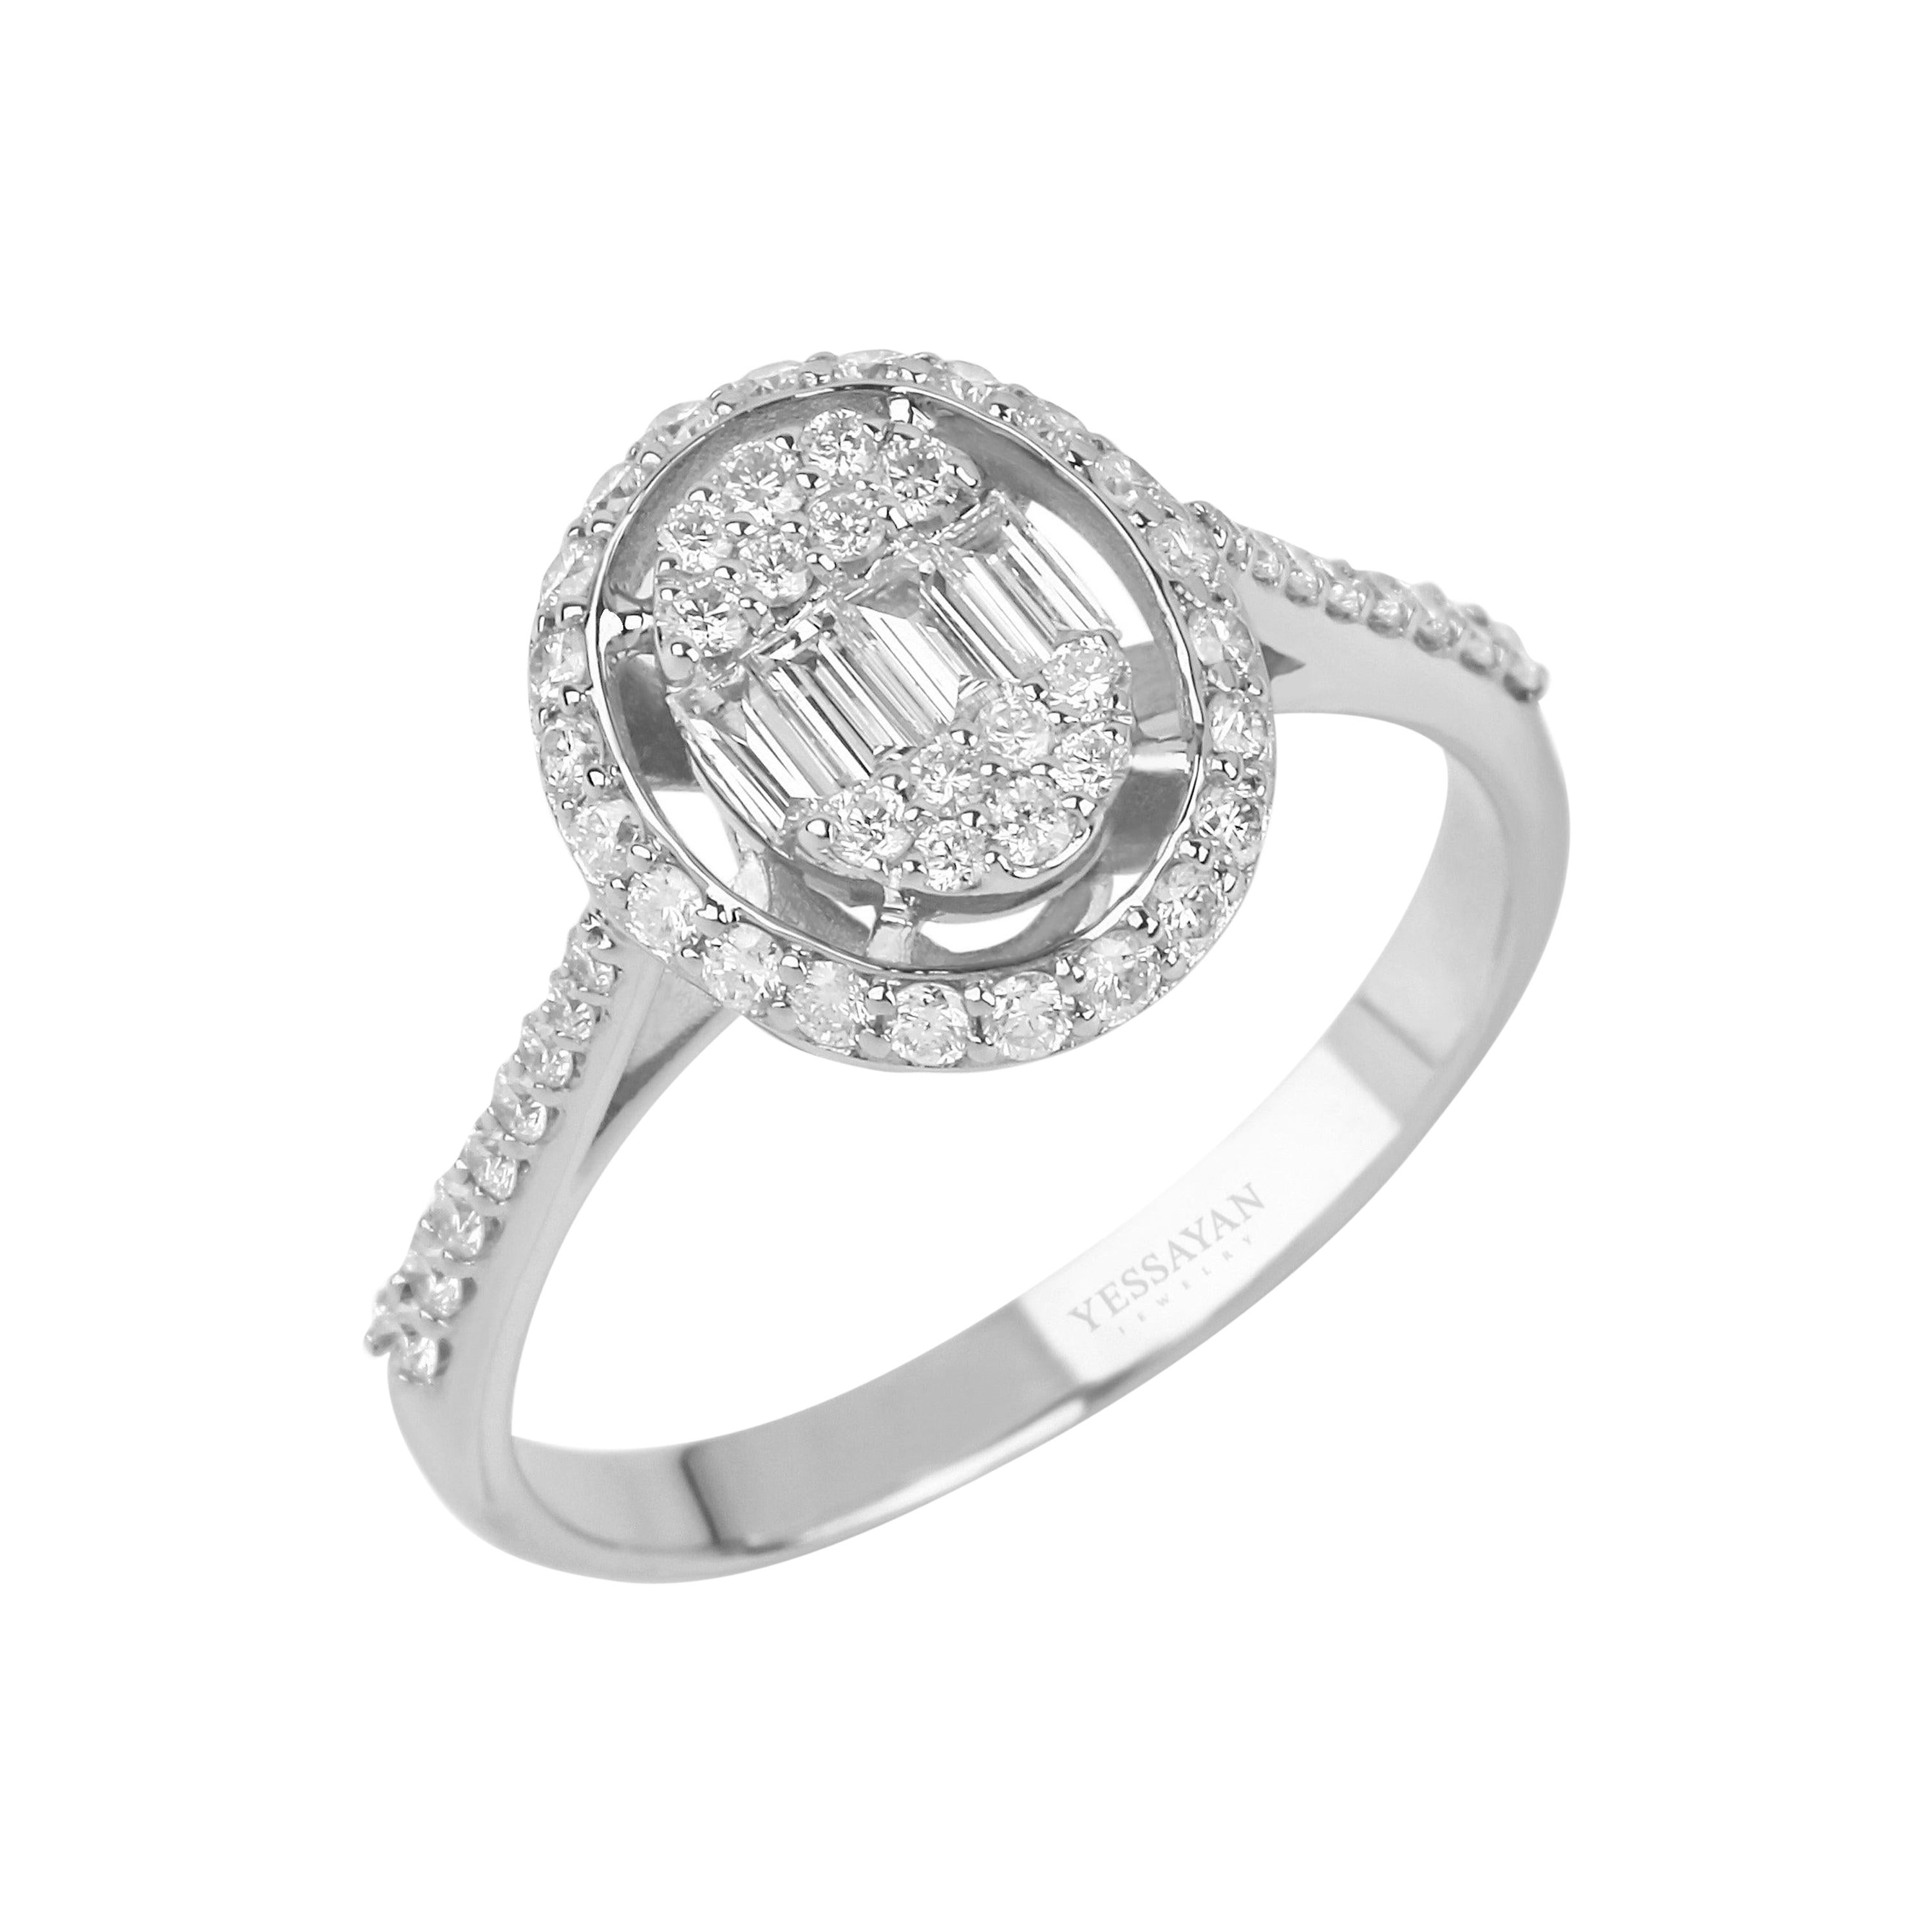 For Sale:  Illusion Baguette Diamond Ring in 18K White Gold